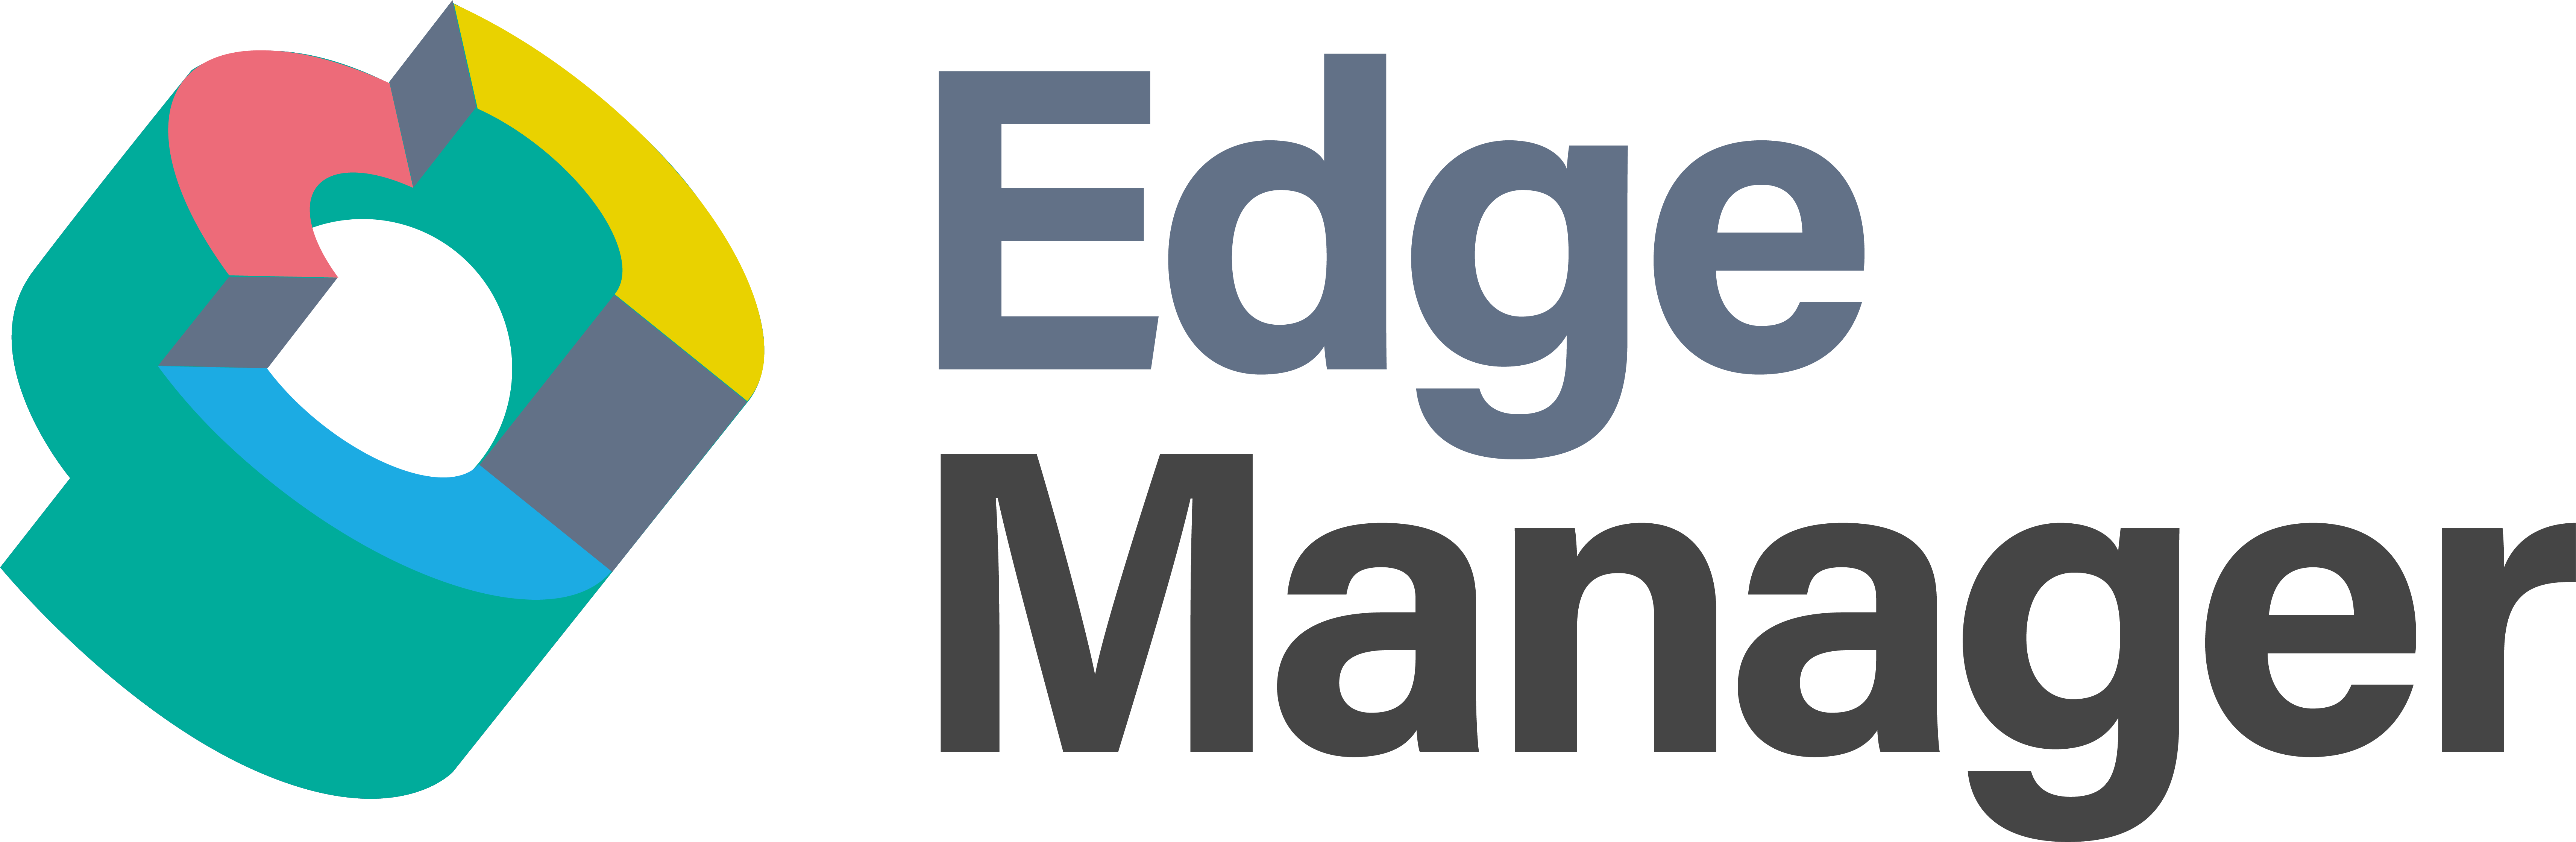 Edge Manager Evaluation